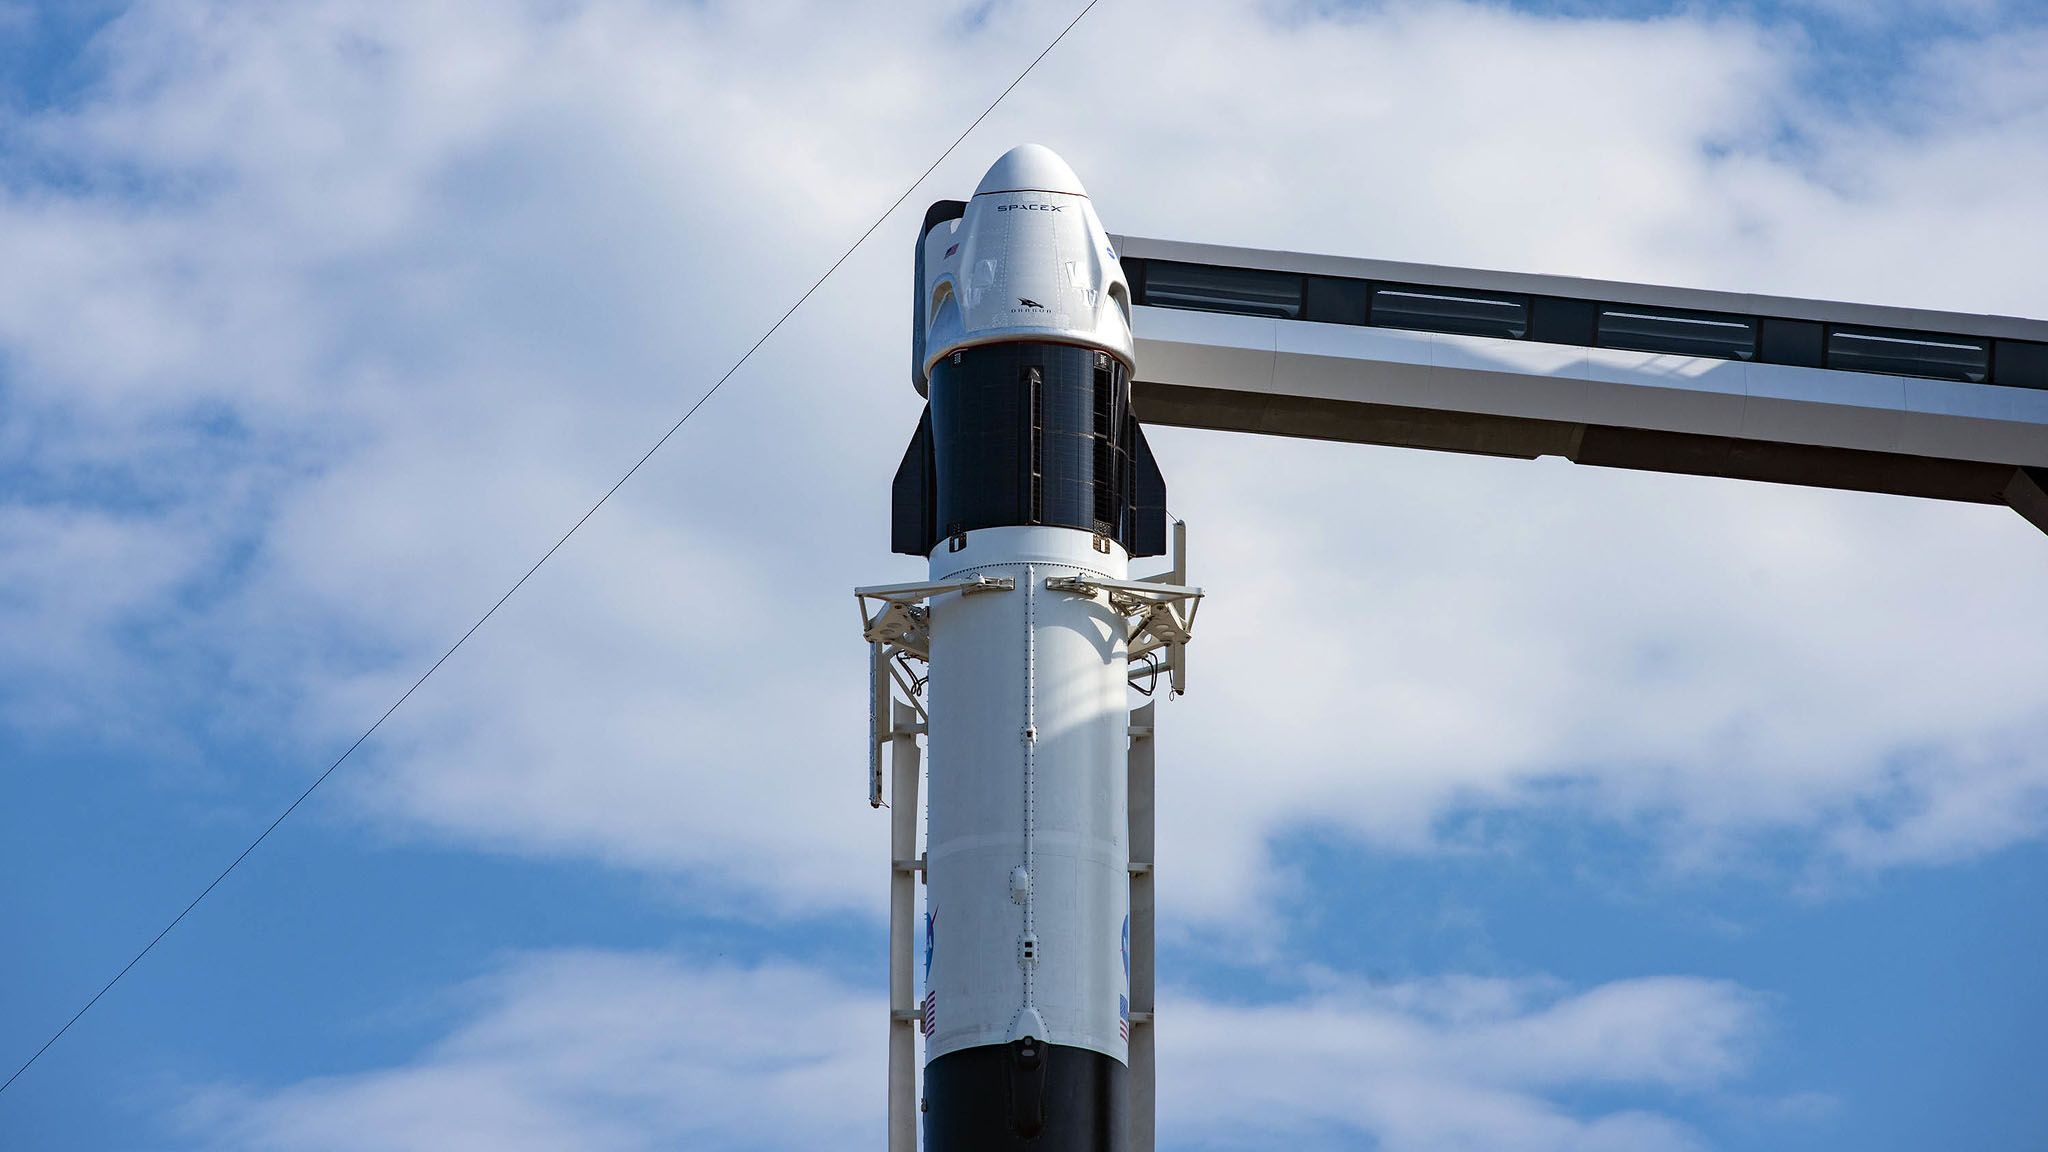 In Photo: SpaceX's Crew Dragon Demo 2 Mission To The International Space Station